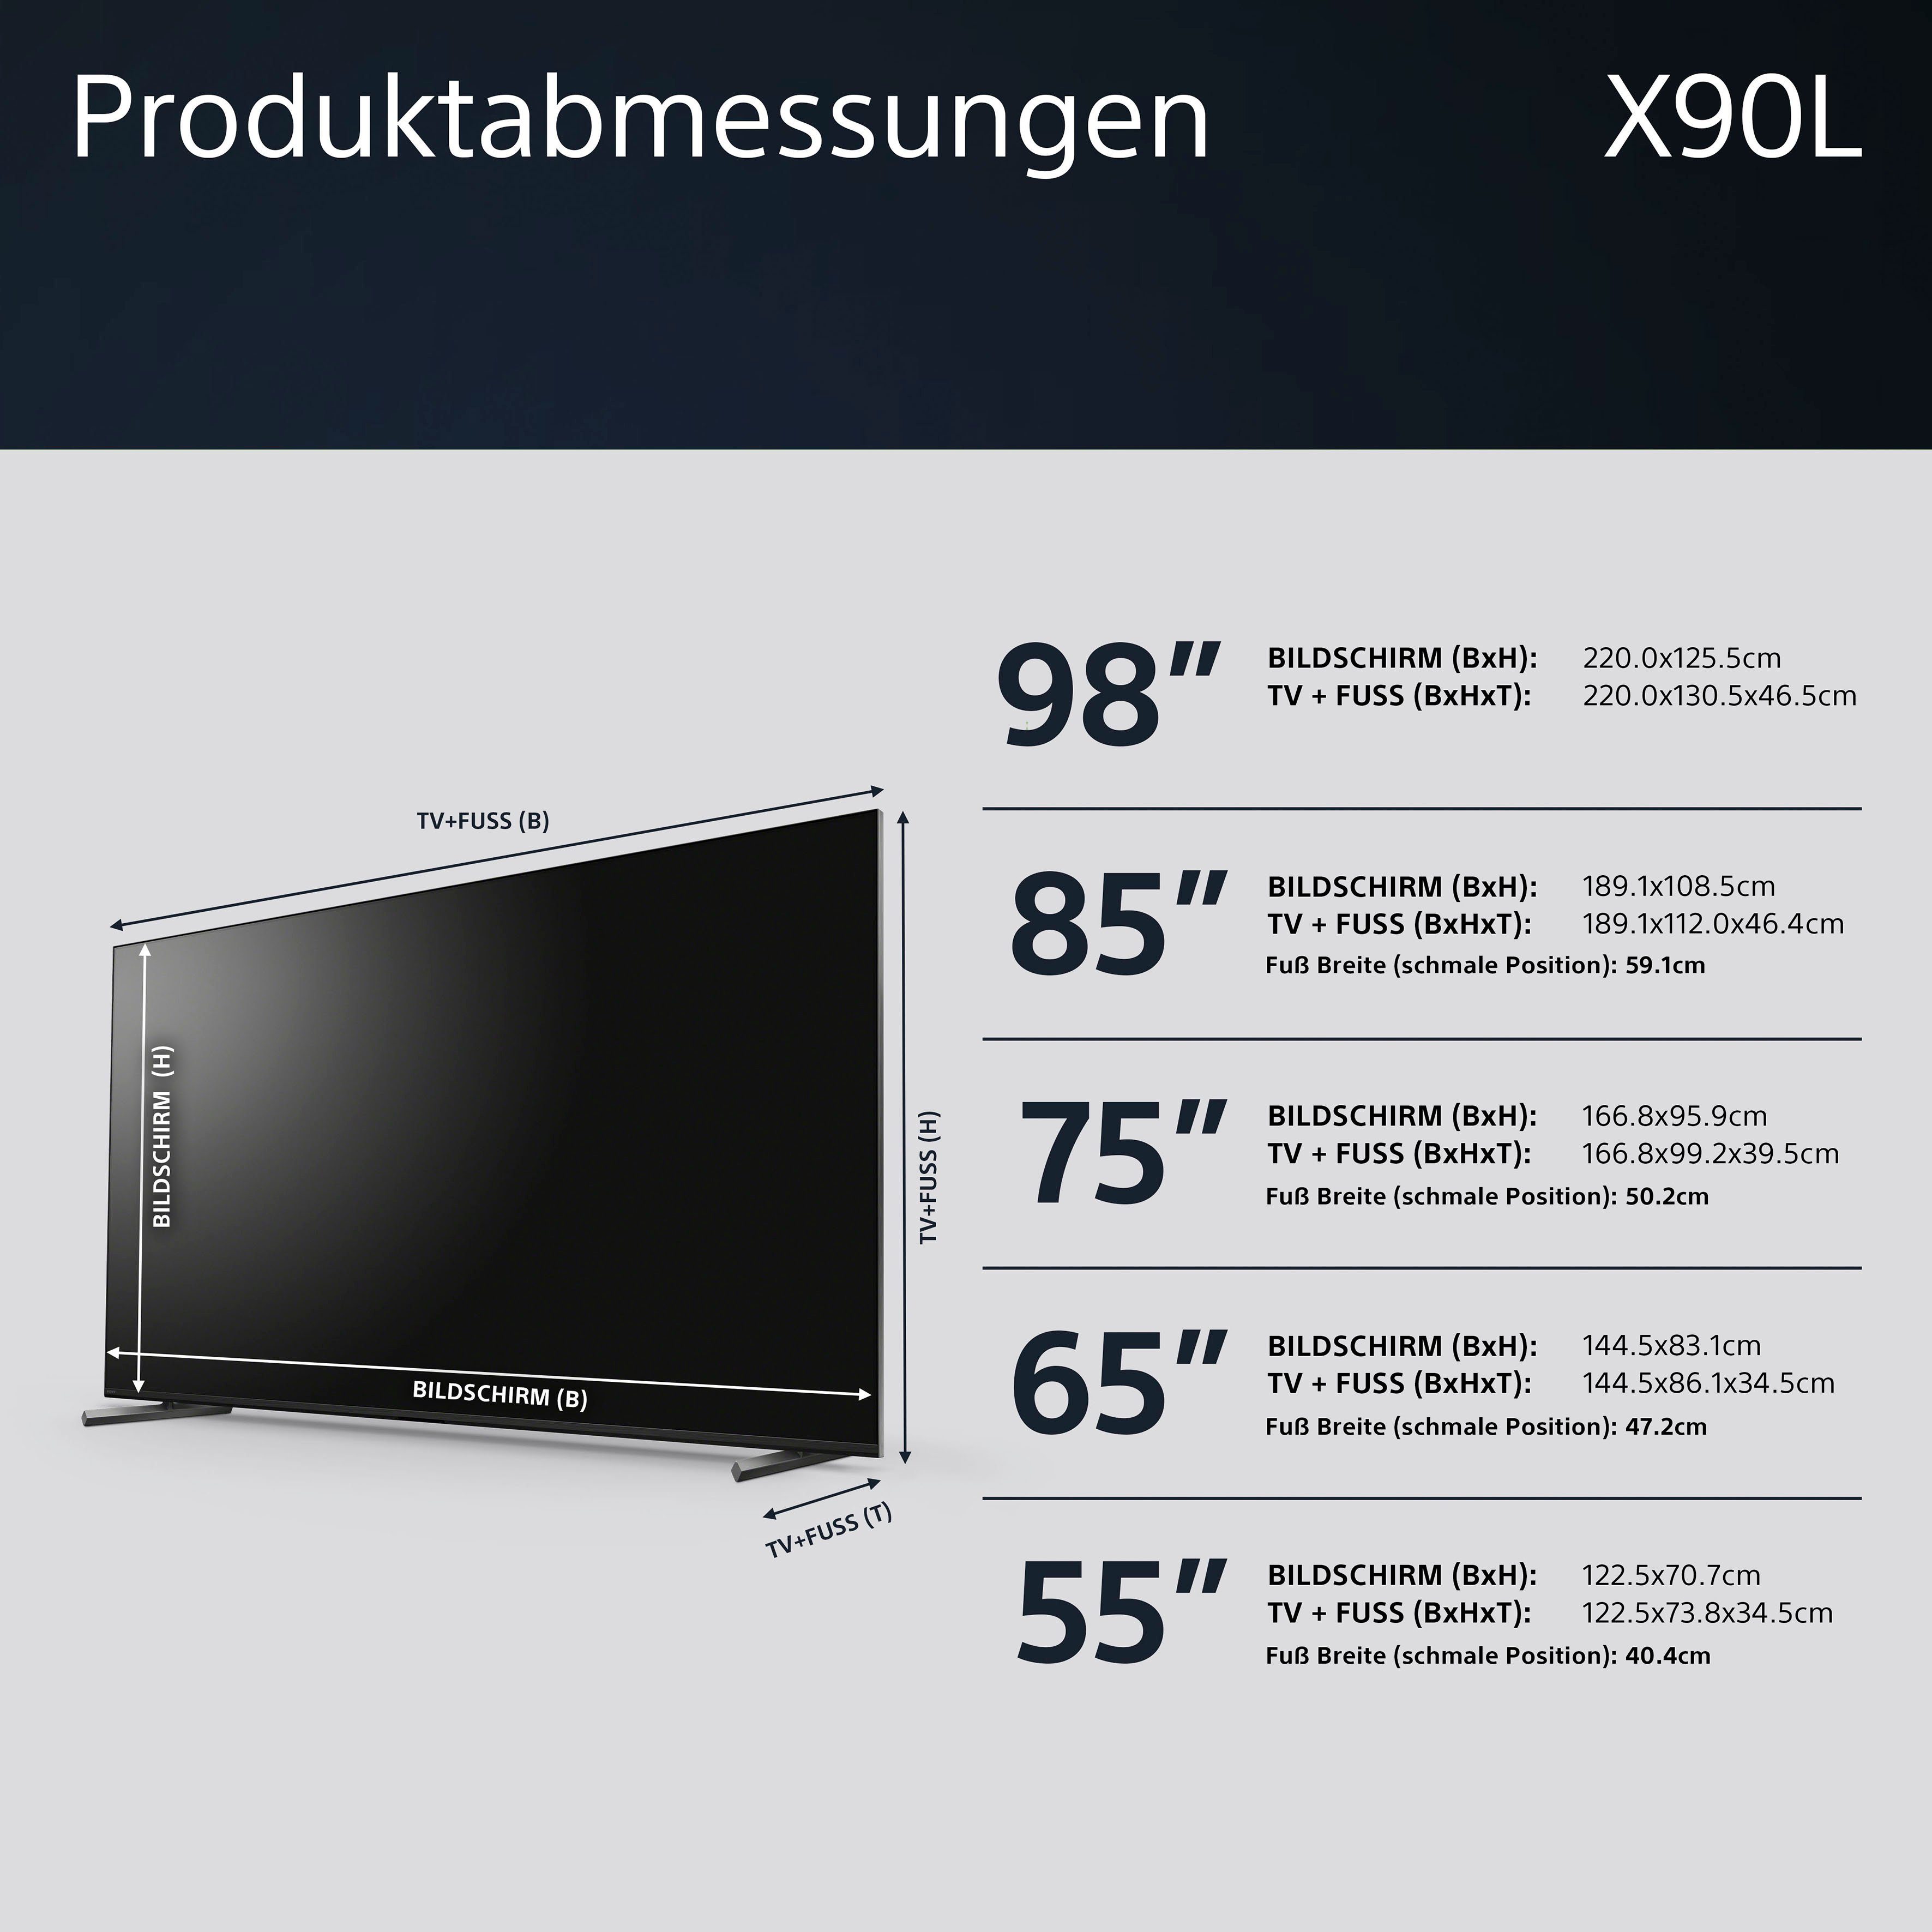 LED-Fernseher CORE, cm/85 (215 BRAVIA Zoll, Sony HD, mit Ultra 4K TV, PRO, Google TRILUMINOS XR-85X90L PS5-Features) exklusiven